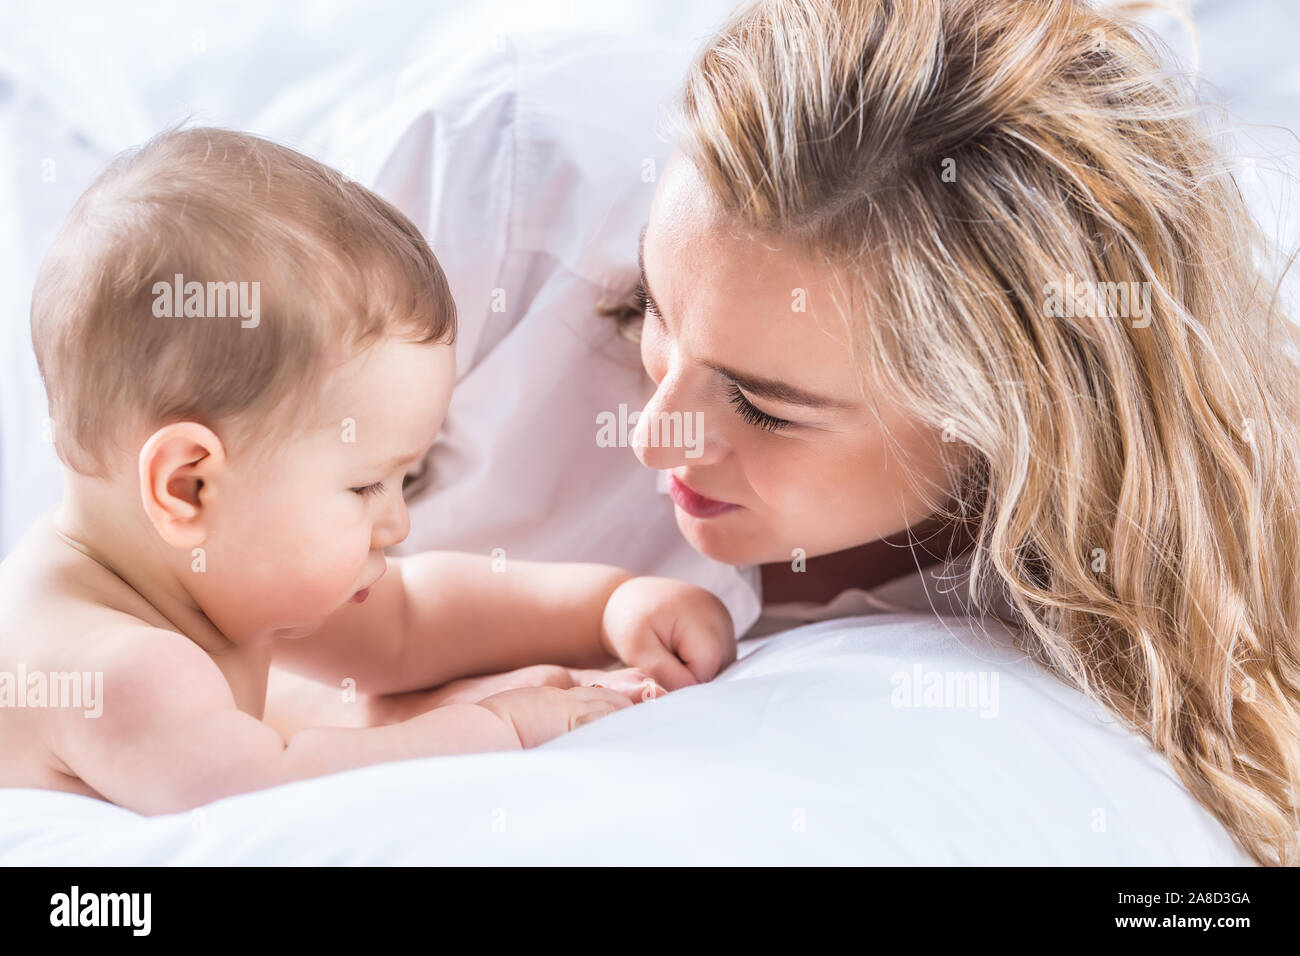 Mother and baby boy son playing on a white bed. Mothers tenderness and kisses of a toddler child. Stock Photo